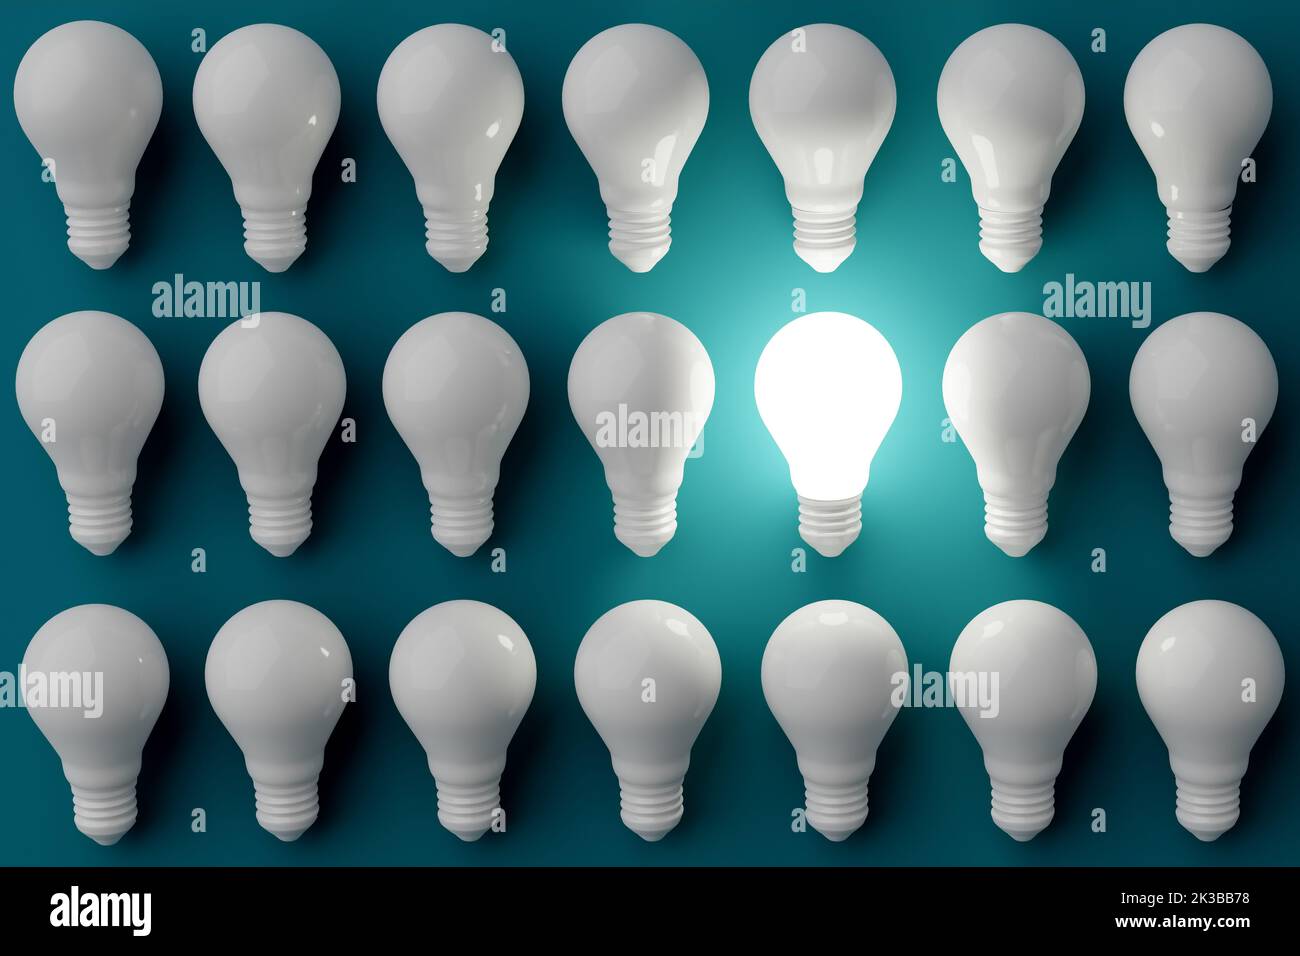 Thinking in a different, innovative and creative way. Finding an idea or solution. Individuality, leadership, originality, difference and uniqueness. Stock Photo